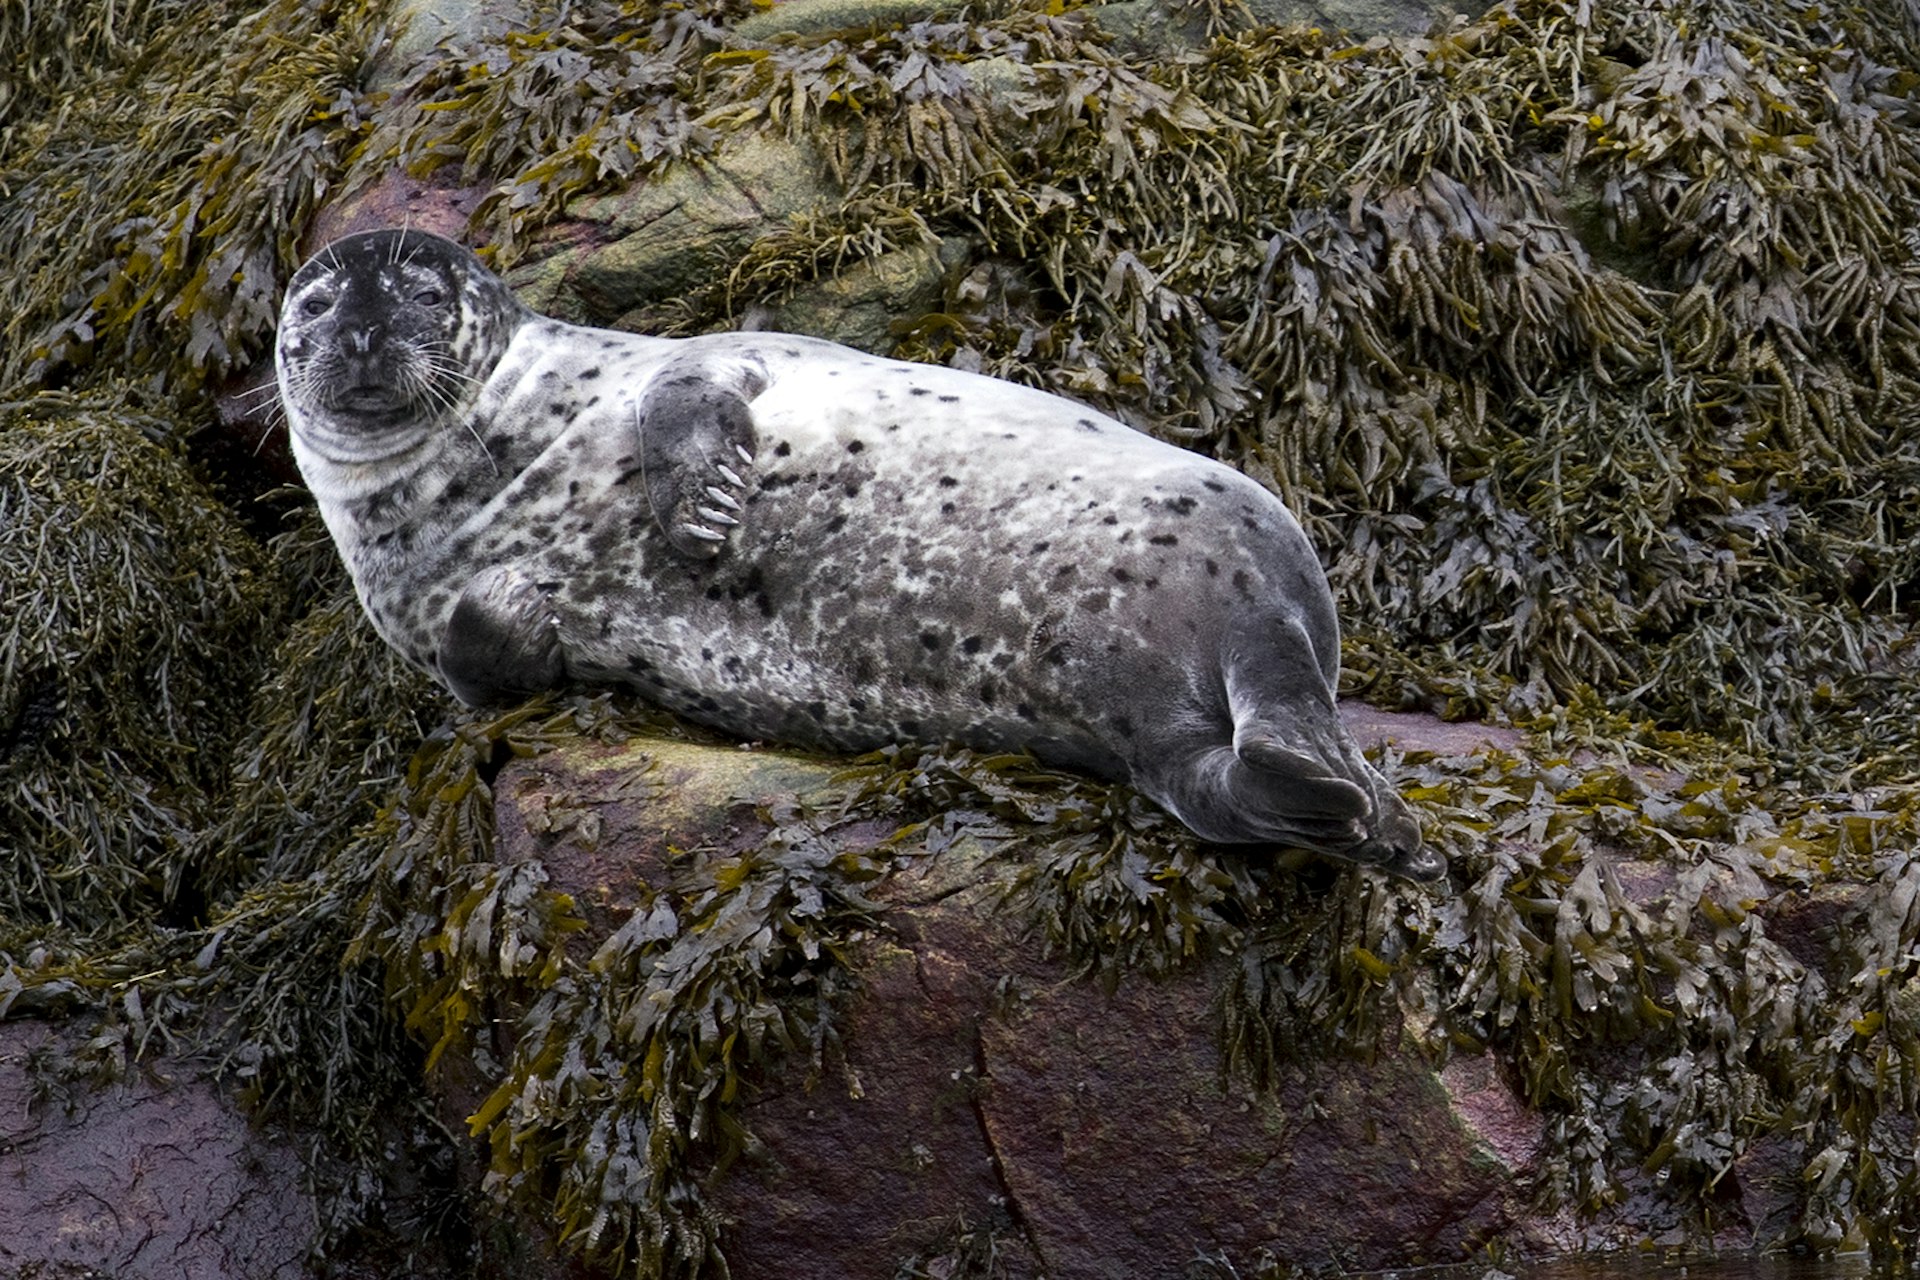 A grey seal strikes a pose on the rocks in Baie Ste-Catherine. Image by Kerry Christiani / Lonely Planet